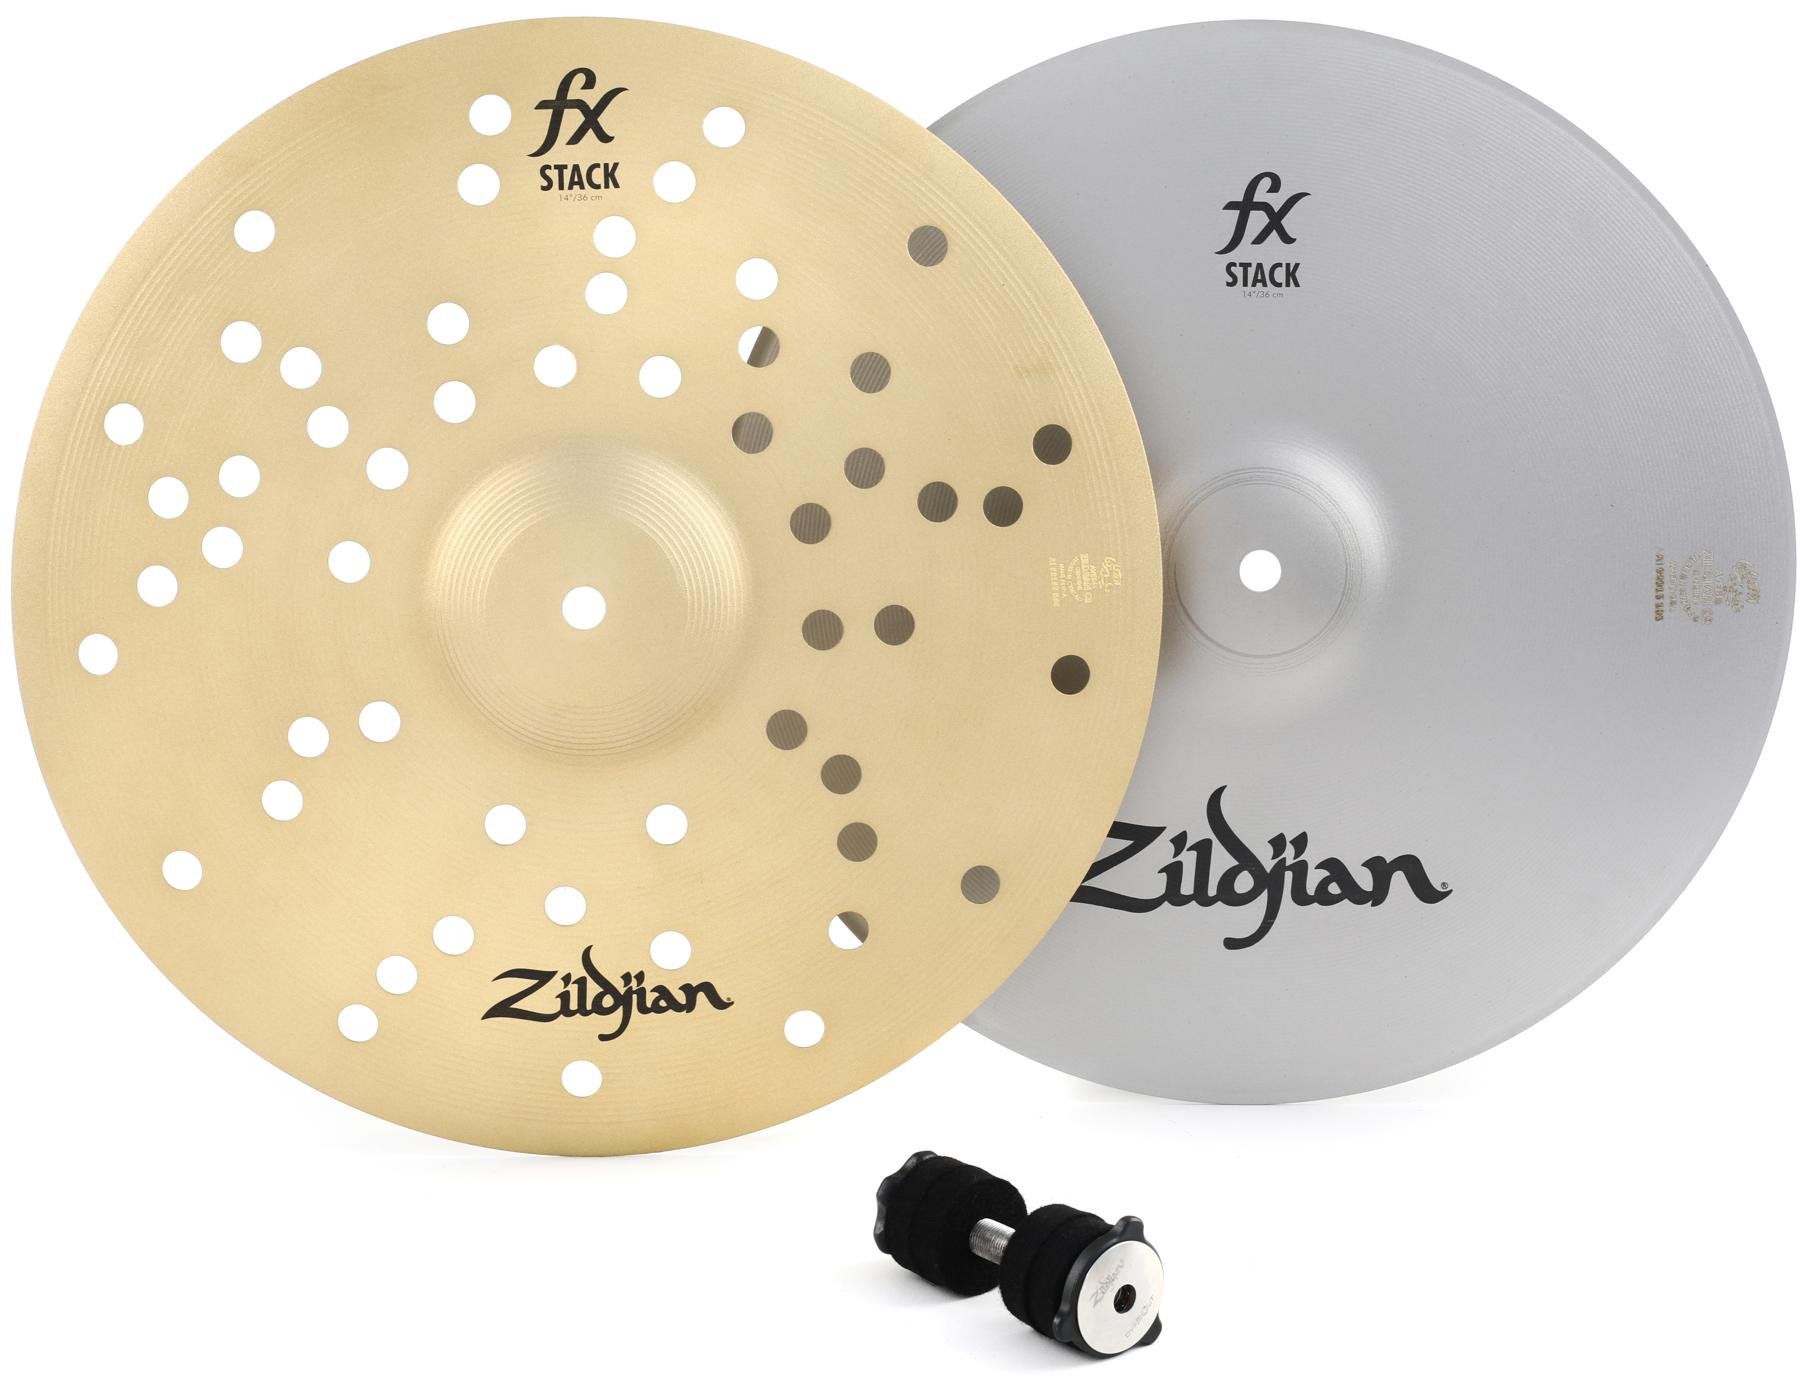 Zildjian 14 inch FX Stack Cymbal with Cymbolt Mount | Sweetwater